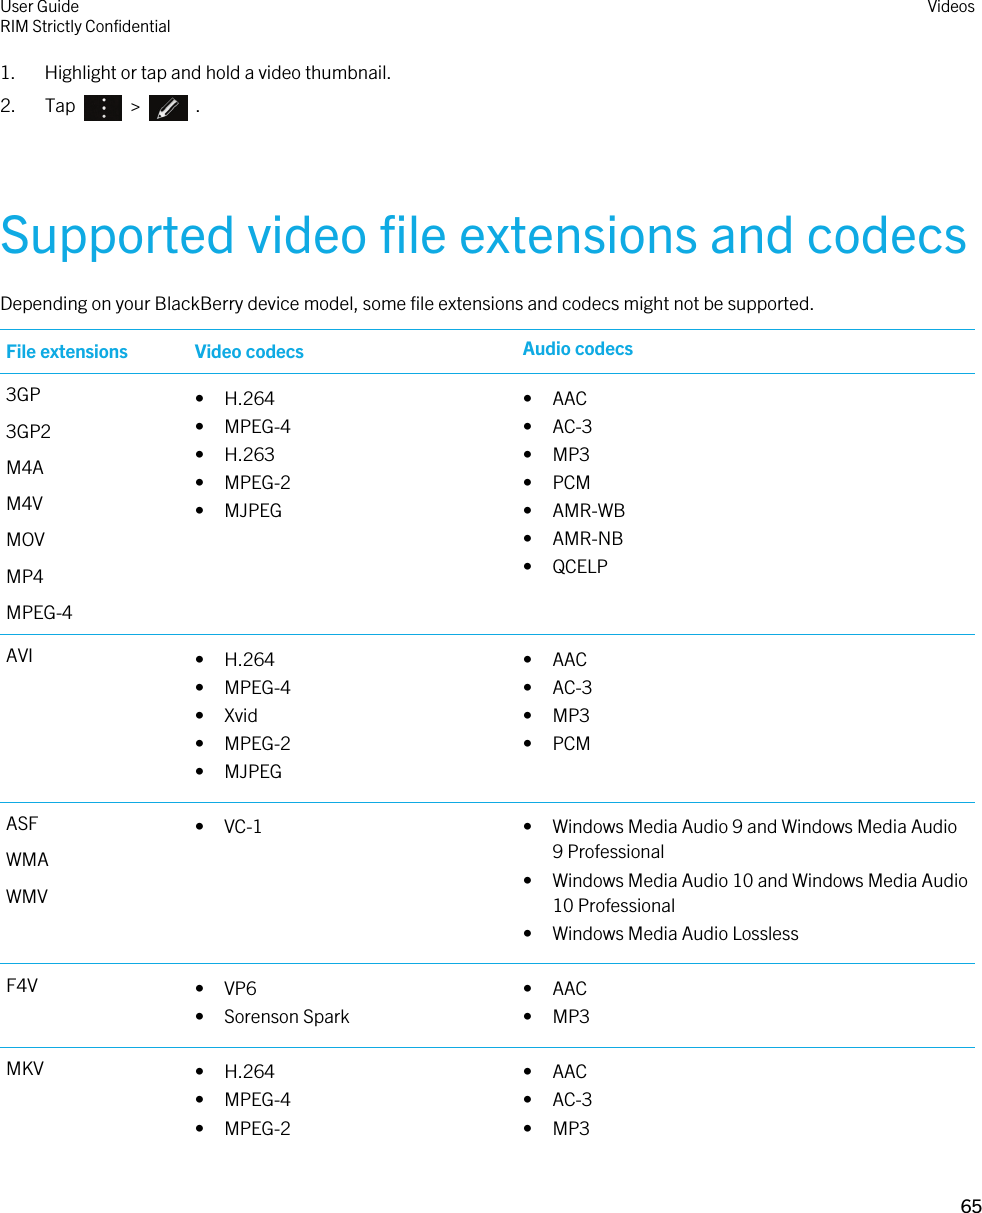 1. Highlight or tap and hold a video thumbnail.2.  Tap    &gt;    .Supported video file extensions and codecsDepending on your BlackBerry device model, some file extensions and codecs might not be supported.File extensions Video codecs Audio codecs3GP3GP2M4AM4VMOVMP4MPEG-4• H.264• MPEG-4• H.263• MPEG-2• MJPEG• AAC• AC-3• MP3• PCM• AMR-WB• AMR-NB• QCELPAVI • H.264• MPEG-4• Xvid• MPEG-2• MJPEG• AAC• AC-3• MP3• PCMASFWMAWMV• VC-1 • Windows Media Audio 9 and Windows Media Audio 9 Professional• Windows Media Audio 10 and Windows Media Audio 10 Professional• Windows Media Audio LosslessF4V • VP6• Sorenson Spark• AAC• MP3MKV • H.264• MPEG-4• MPEG-2• AAC• AC-3• MP3User GuideRIM Strictly Confidential Videos65 